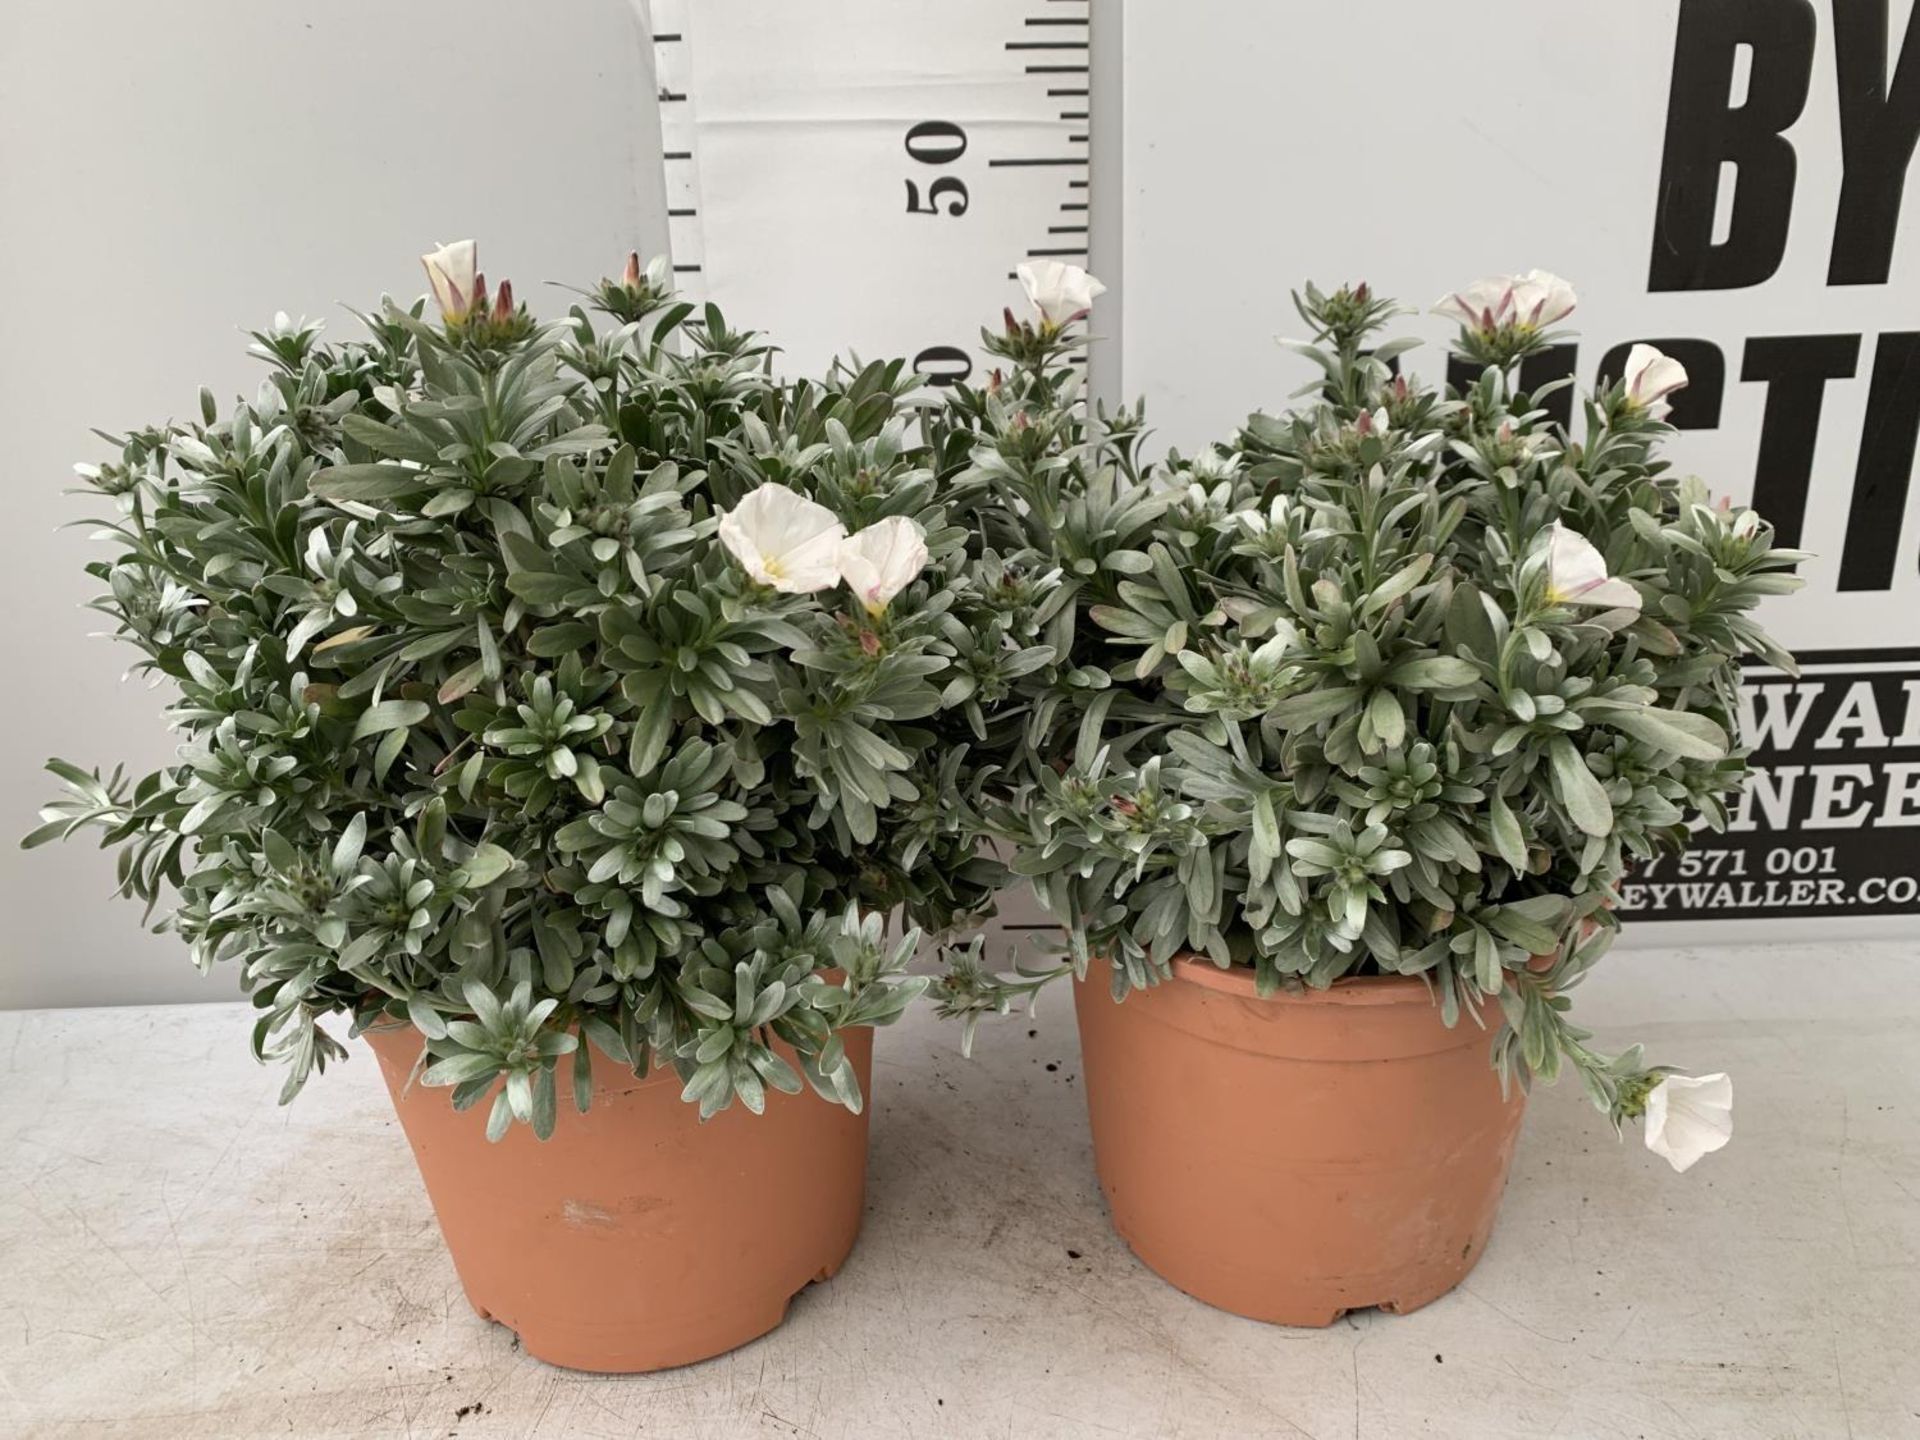 TWO CONVOLVULUS CNEORUM WITH WHITE FLOWERS IN 5 LTR POTS APPROX 45CM IN EHIGHT PLUS VAT TO BE SOLD - Image 2 of 8